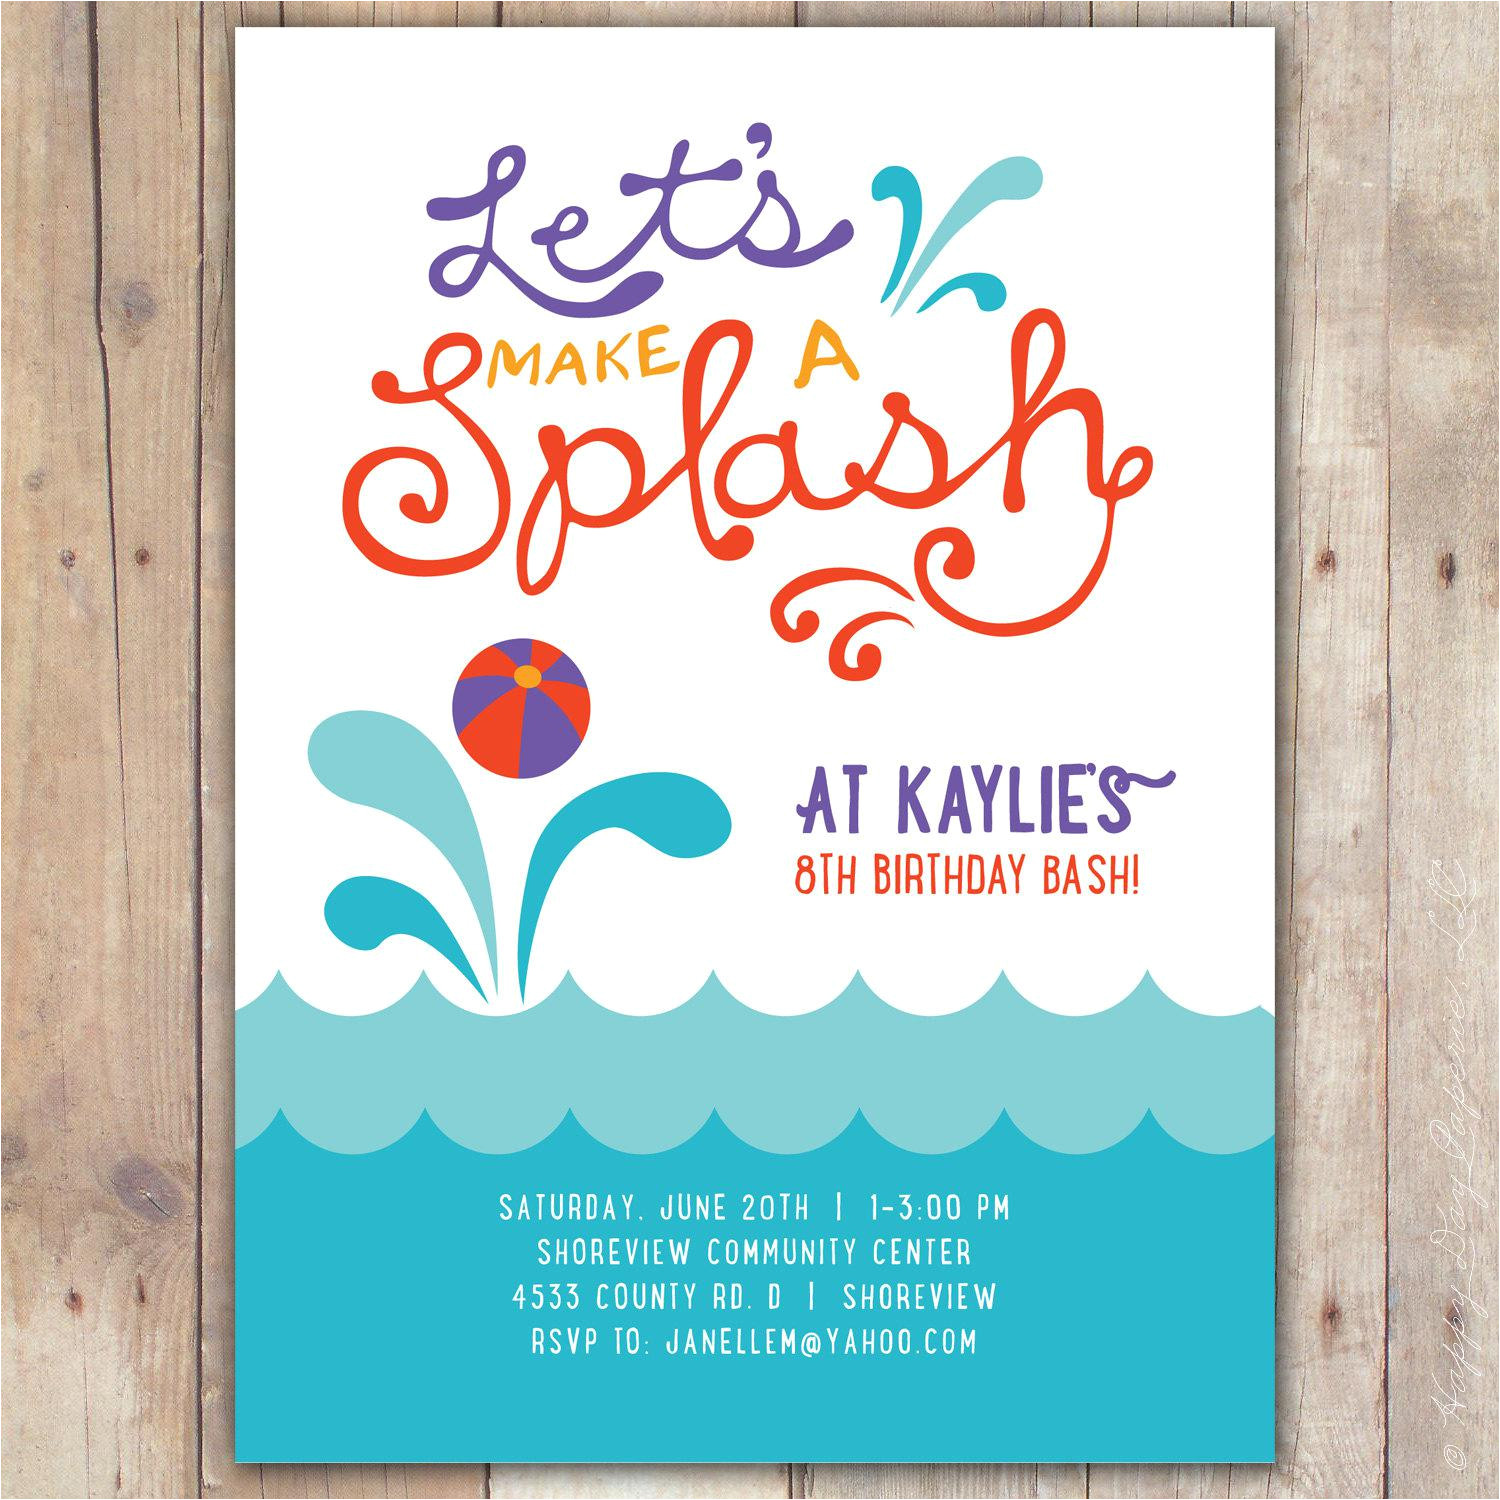 Party Invitation Templates Uk Free Party Invitation Template Party Invitation Templates